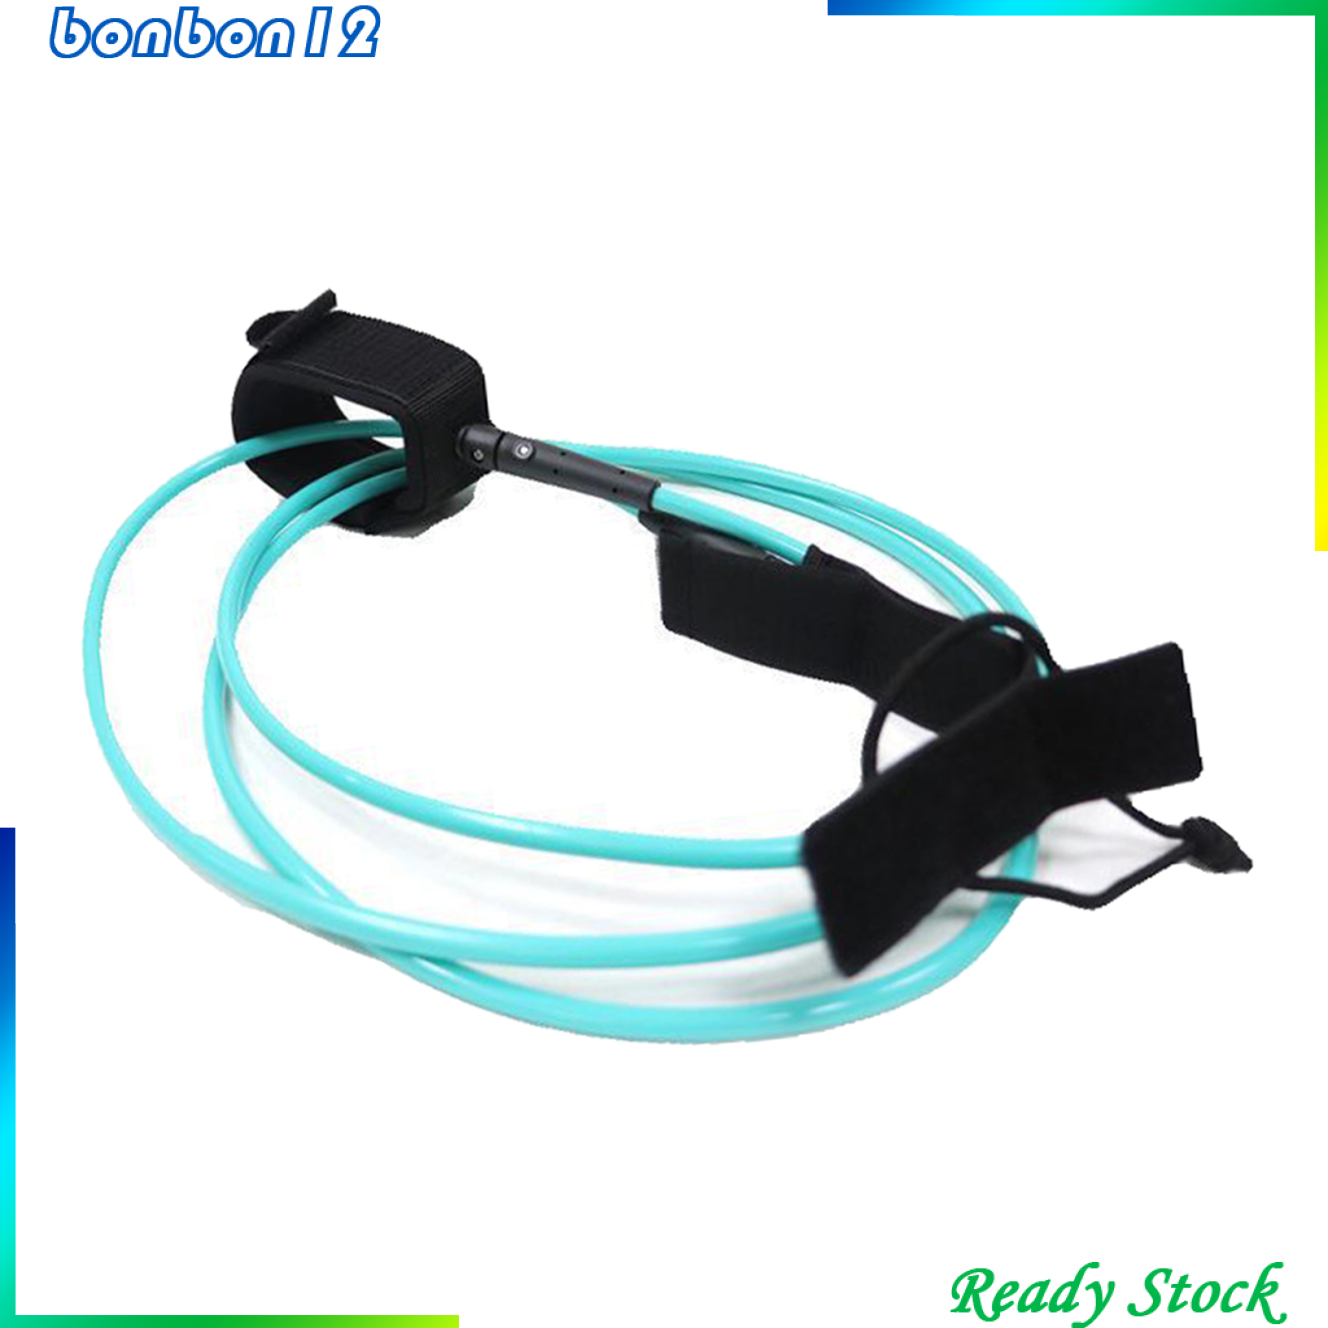 [Home Appliances]10 Feet Surfing Ankle Leash Stand Up Board Leg Rope Leg Wrists Tether Cord